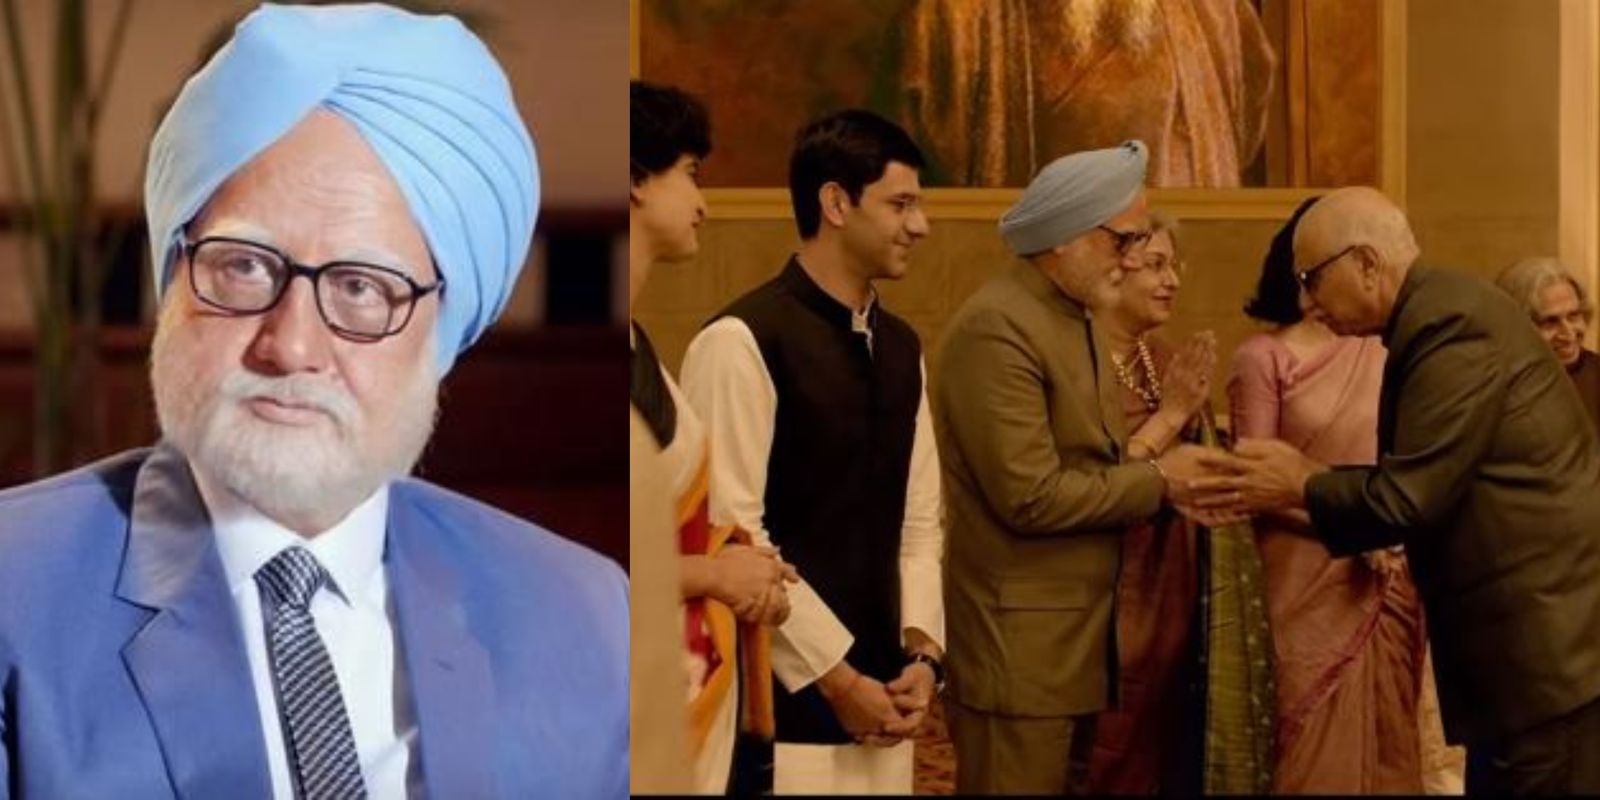 Watch: The Accidental Prime Minister Trailer Shows Why It Is One Of The Most Controversial Films!